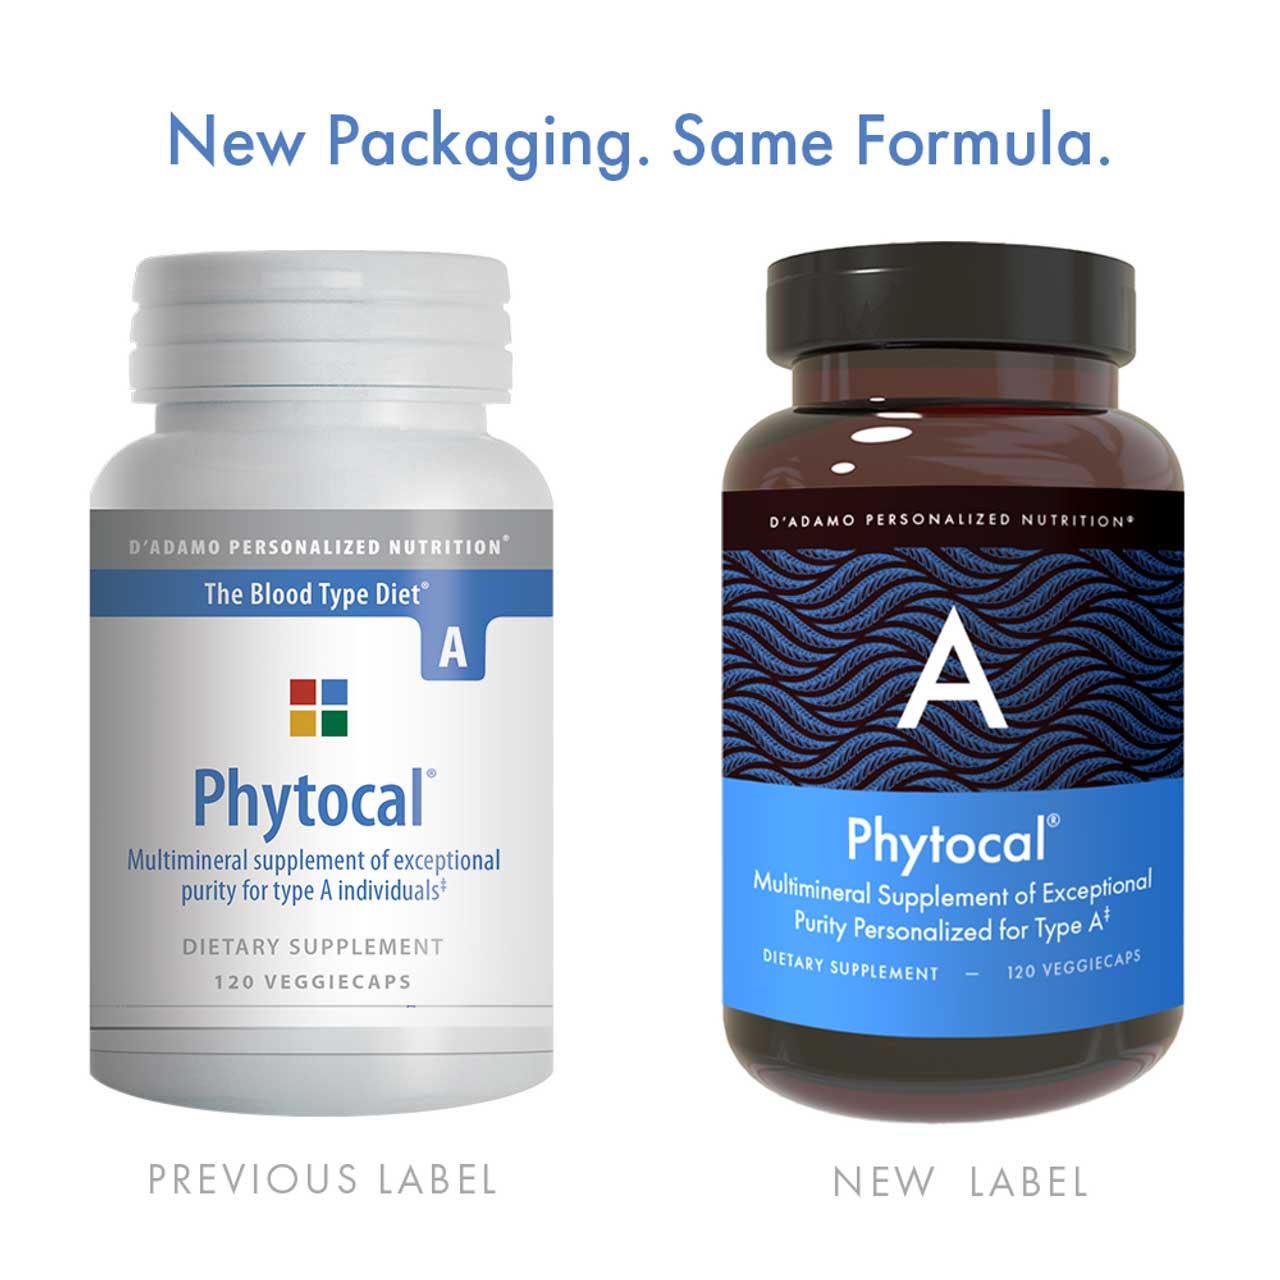 D'Adamo Personalized Nutrition Phytocal A New Label